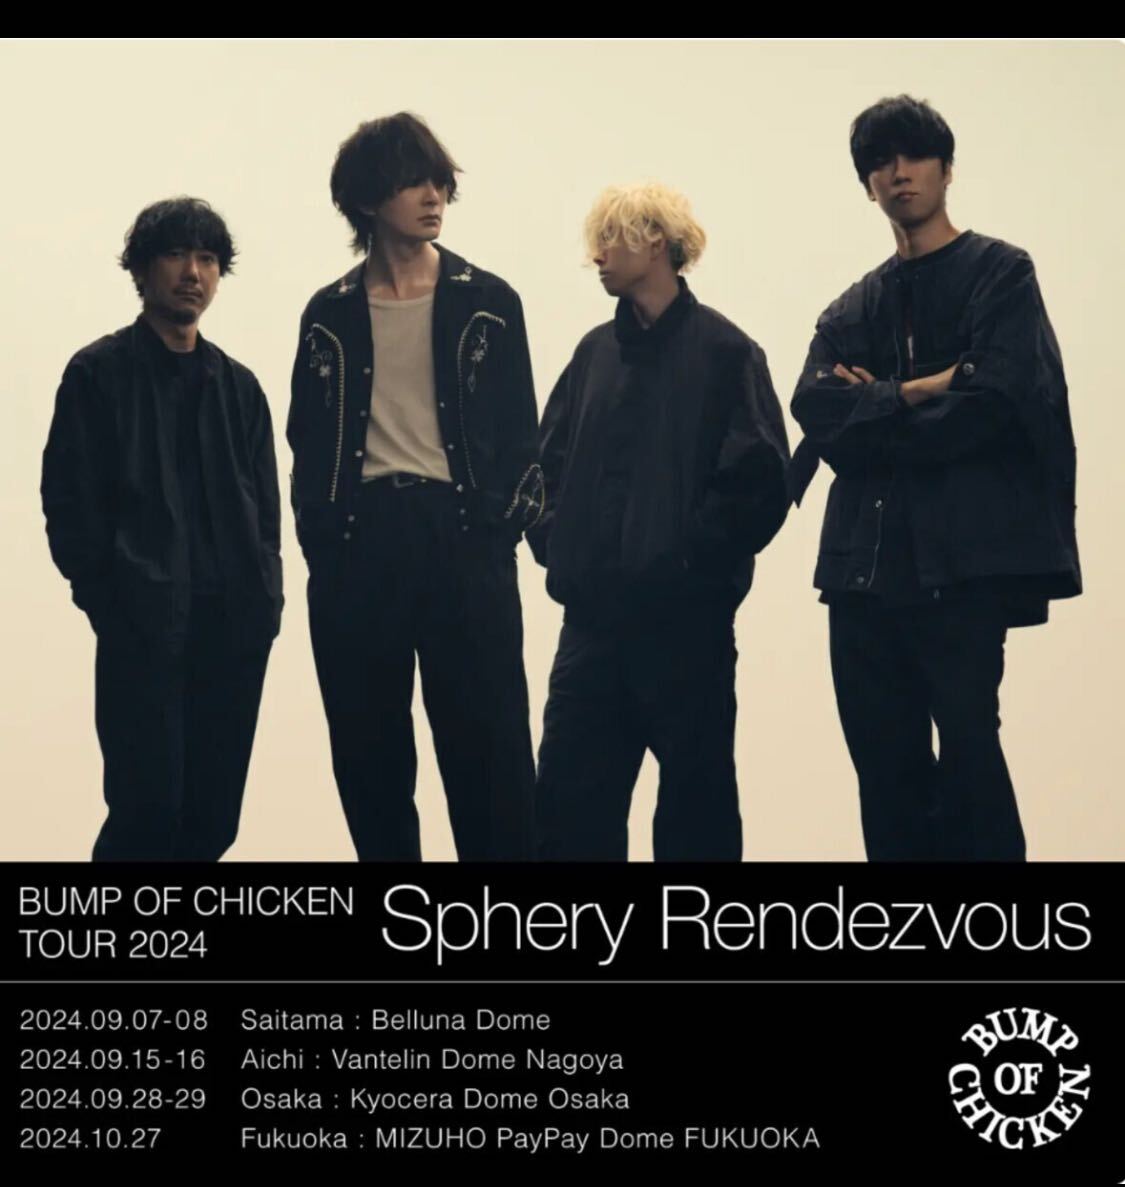 BUMP OF CHICKEN TOUR 2024 Sphery Rendezvous　最速先行抽選　申し込み　シリアルコード　1枚_画像1